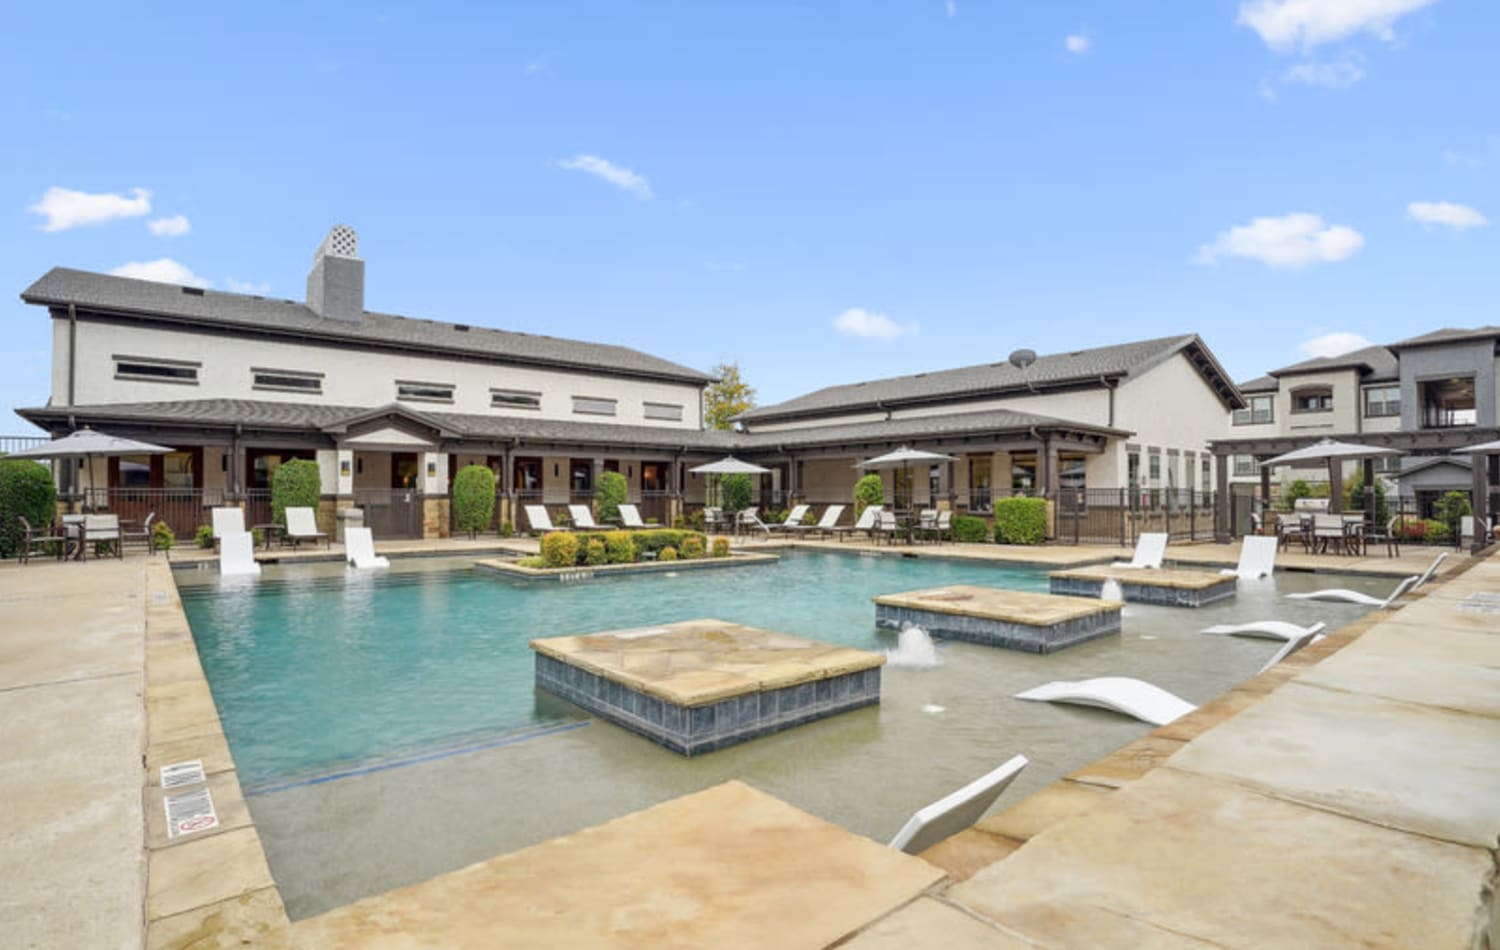 A large pool at Overlook Ranch in Fort Worth, Texas